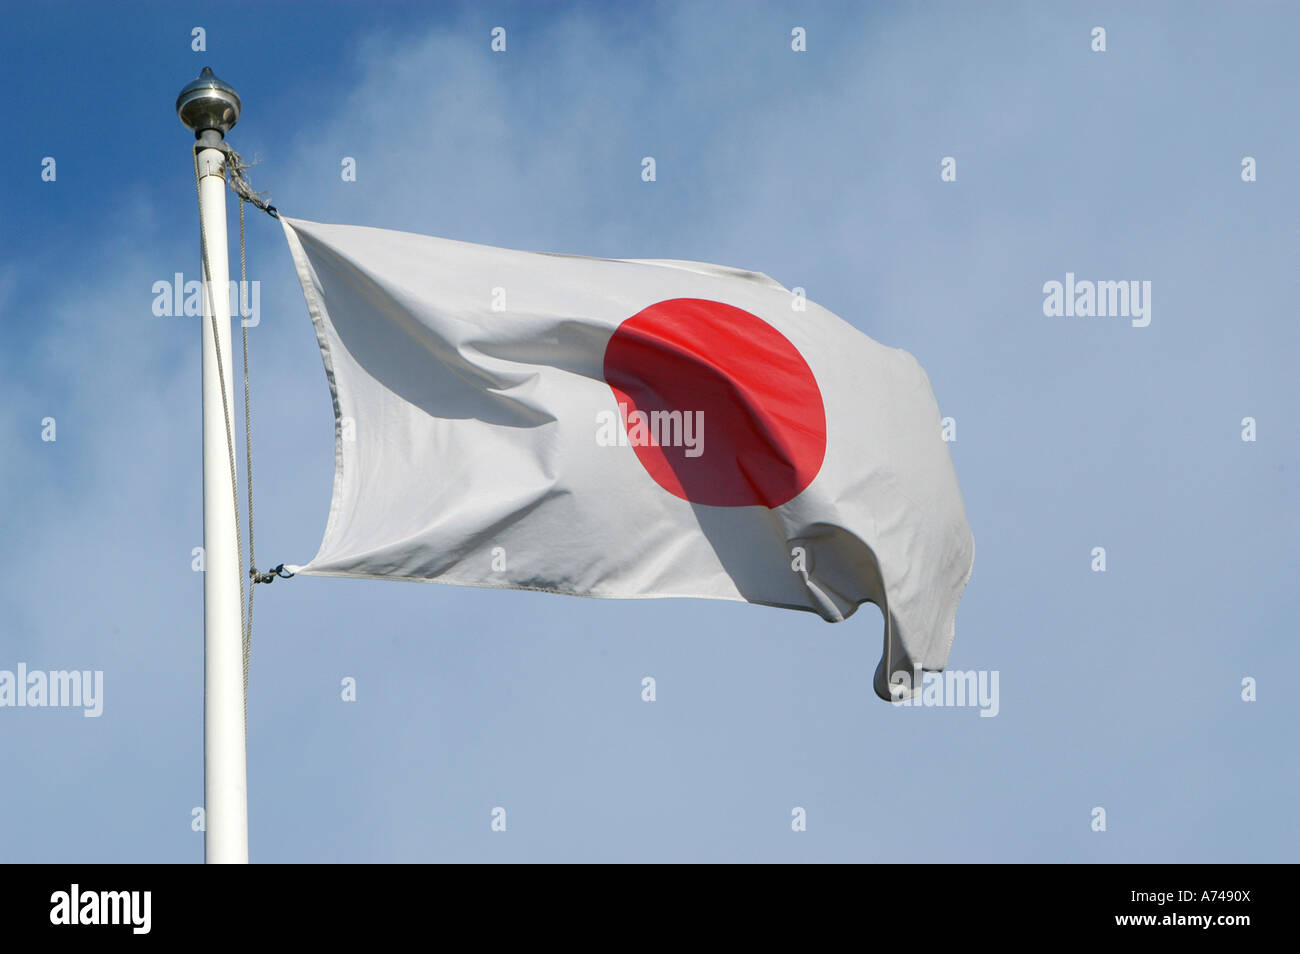 Japanese flag fluttering in the wind against a blue sky Stock Photo